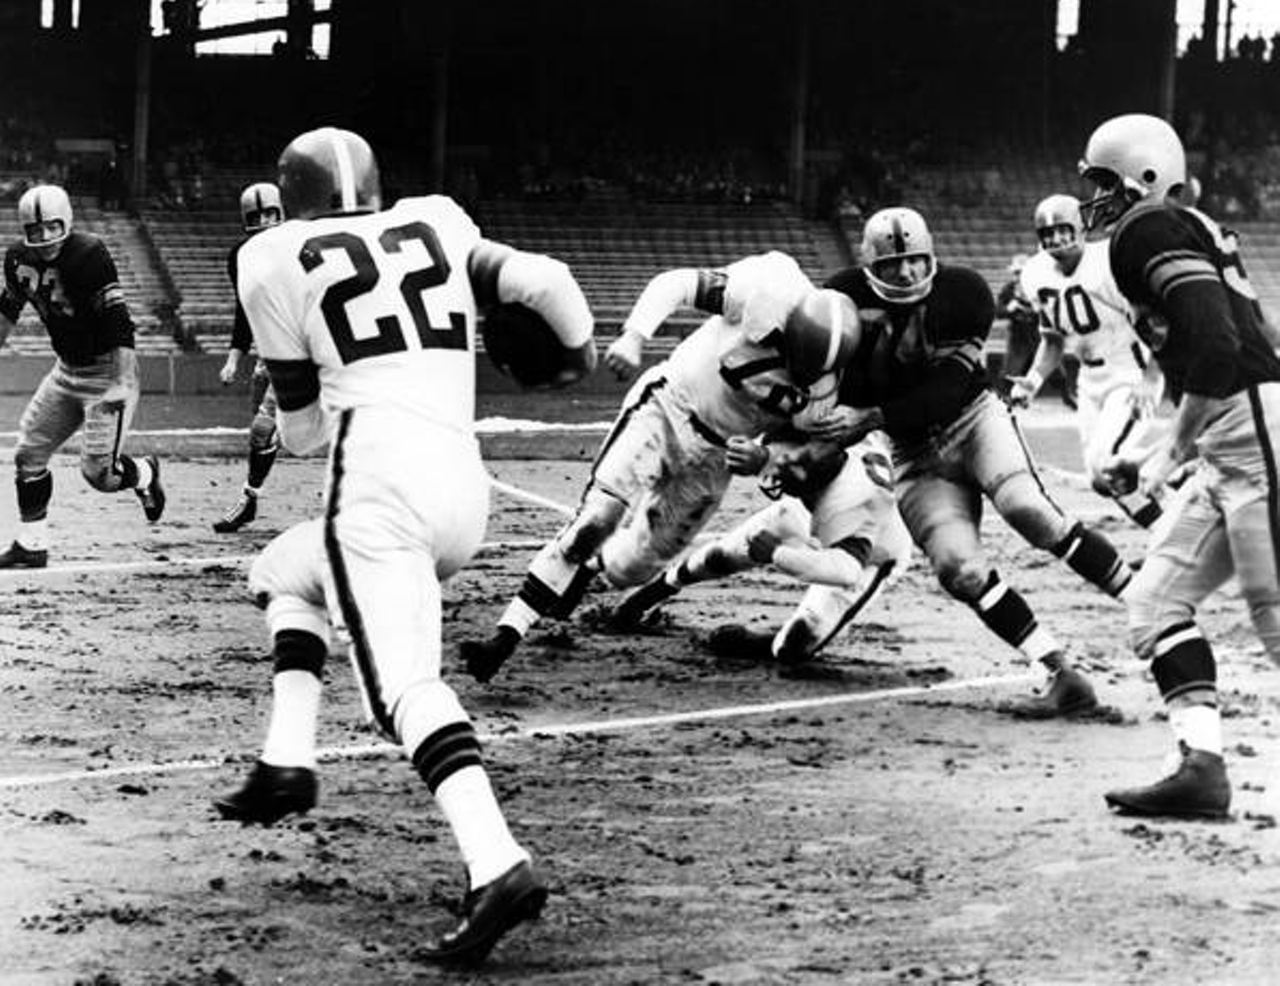 Cleveland Browns vs. Pittsburgh Steelers- 1955
Final Score- Cleveland 41: Steelers 14
"Cleveland Browns defensive back Ken Konz (#22) scores a touchdown from the 15-yard line after intercepting a pass from Pittsburgh Steelers quarterback Jim Finks. Browns #72 John Kissell and #82 Carlton Massey block Steelers Frank Varrichione (#74). Also pictured is Browns #70 Don Colo. The Browns won the game 41-14, to improve to a 7-2 record for the 1955 season."